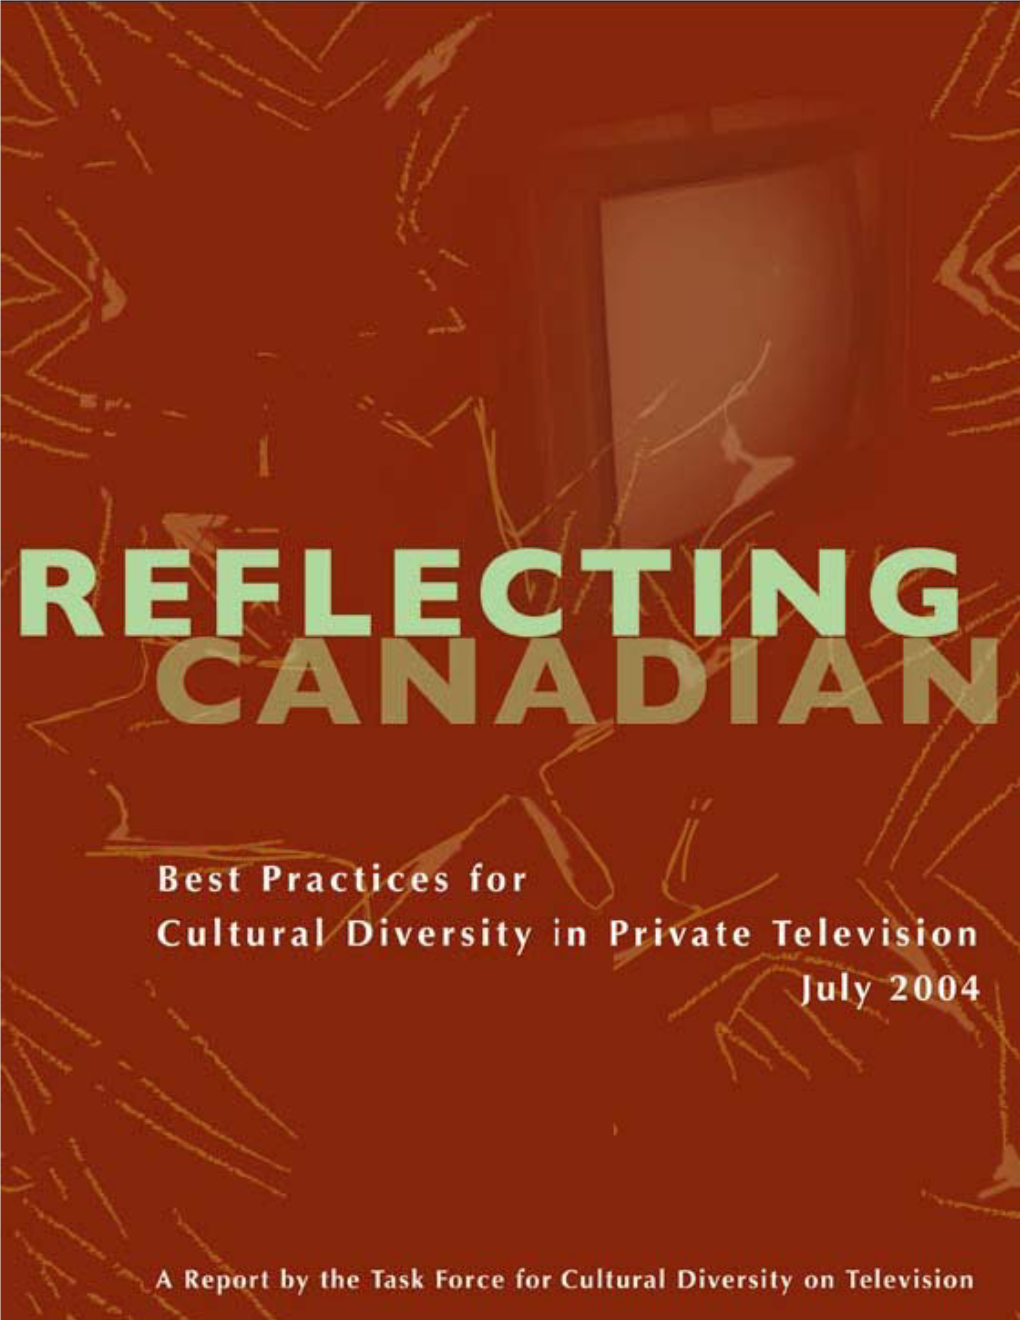 Report of the Task Force for Cultural Diversity on Television